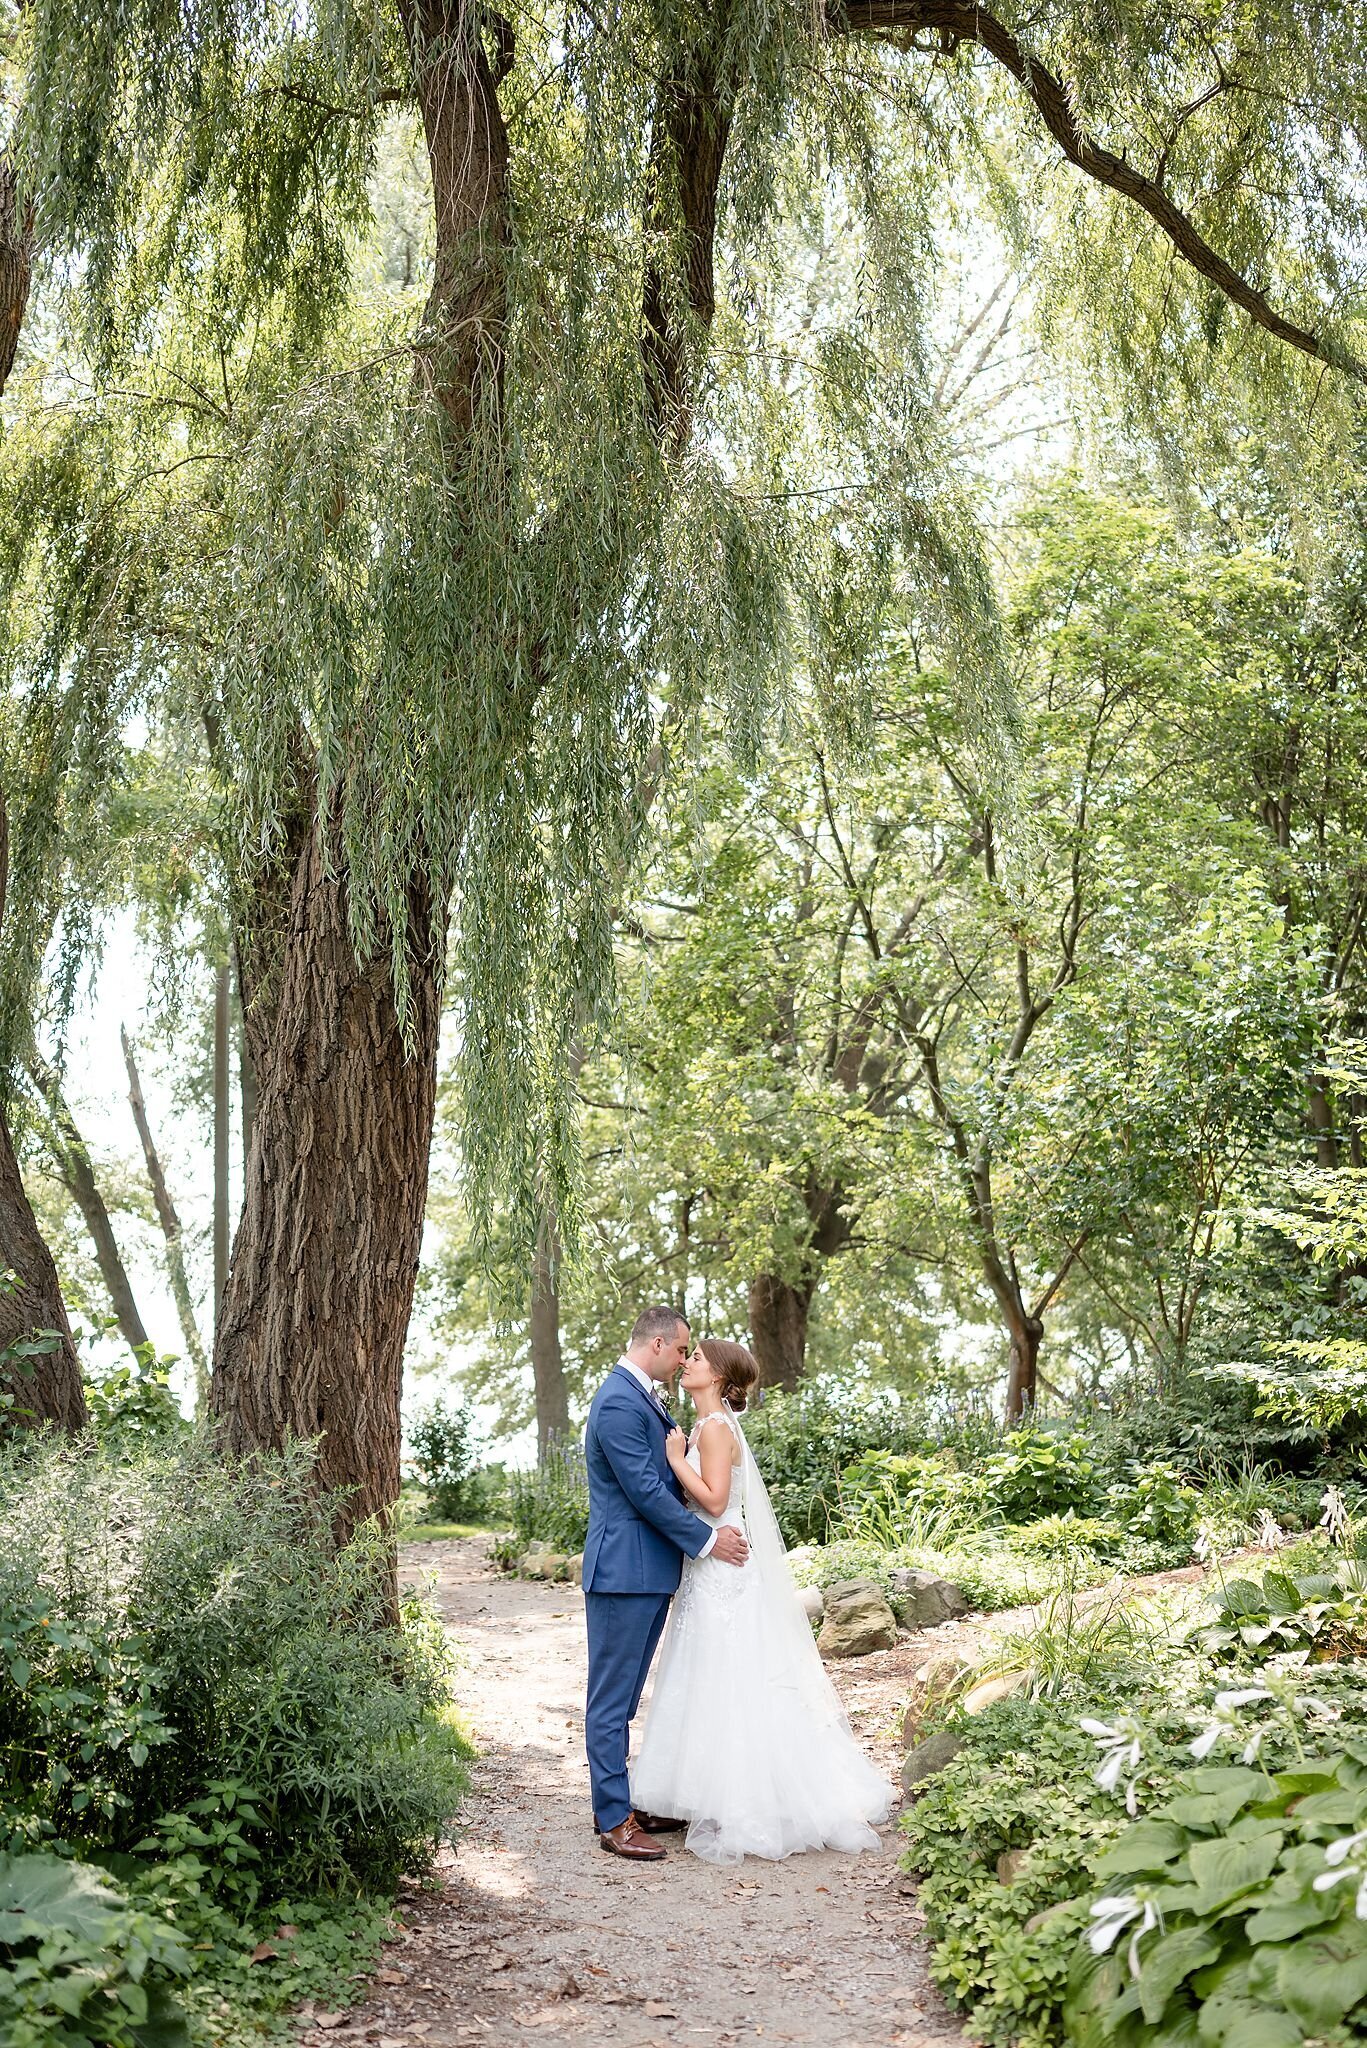 Groom-embraces-his-bride-under-a-large-willow-tree-in-windsor-ontario